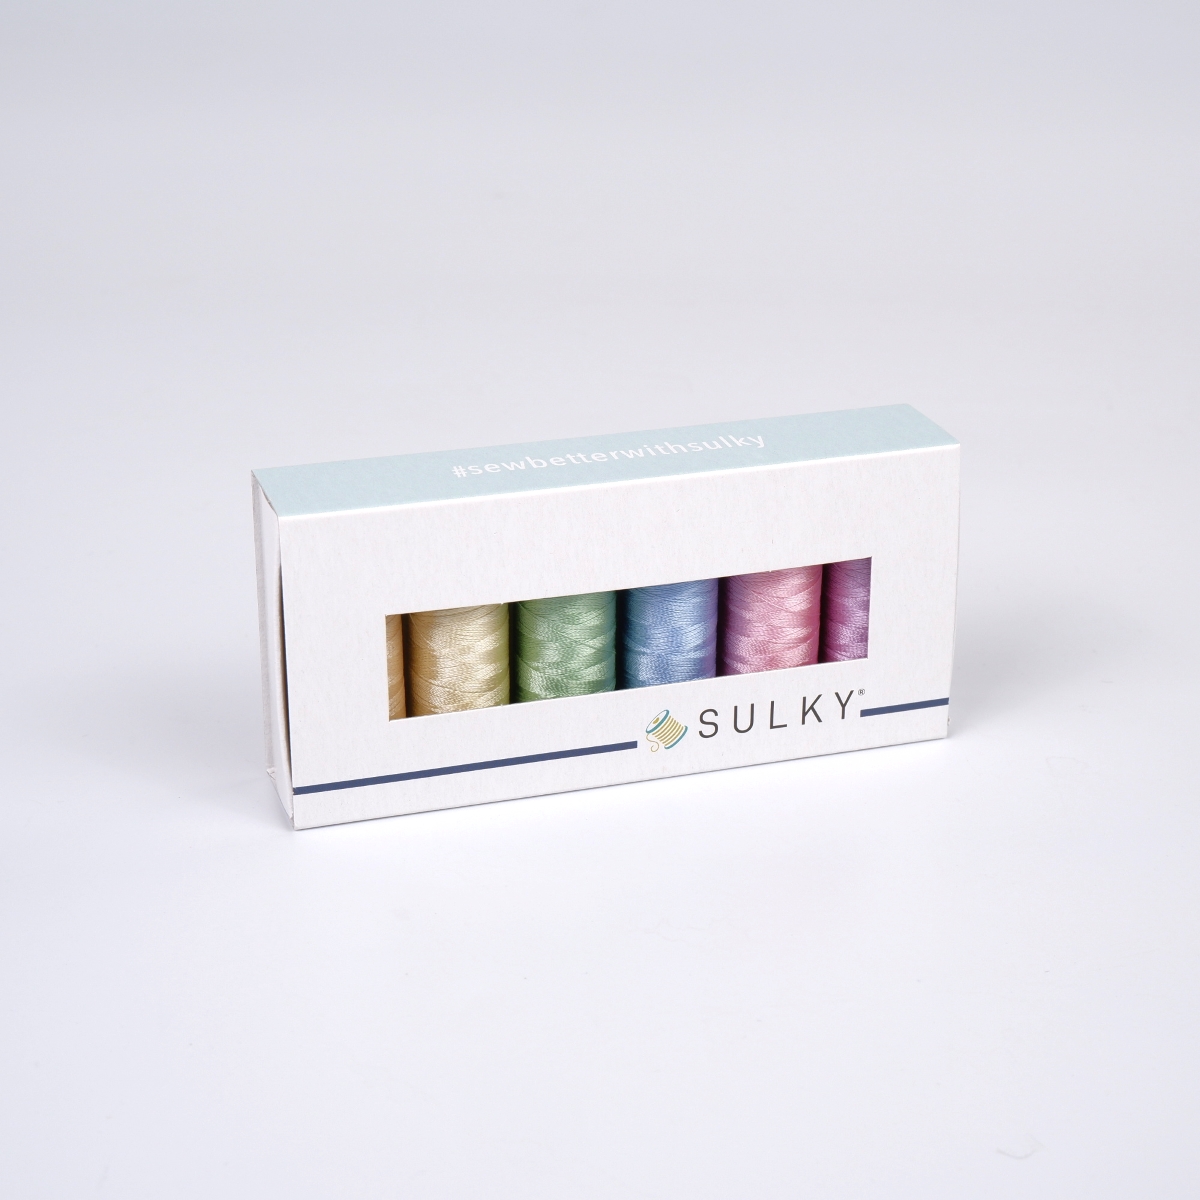 SULKY RAYON 40 - SPRING (6x 225m Snap
Spools)